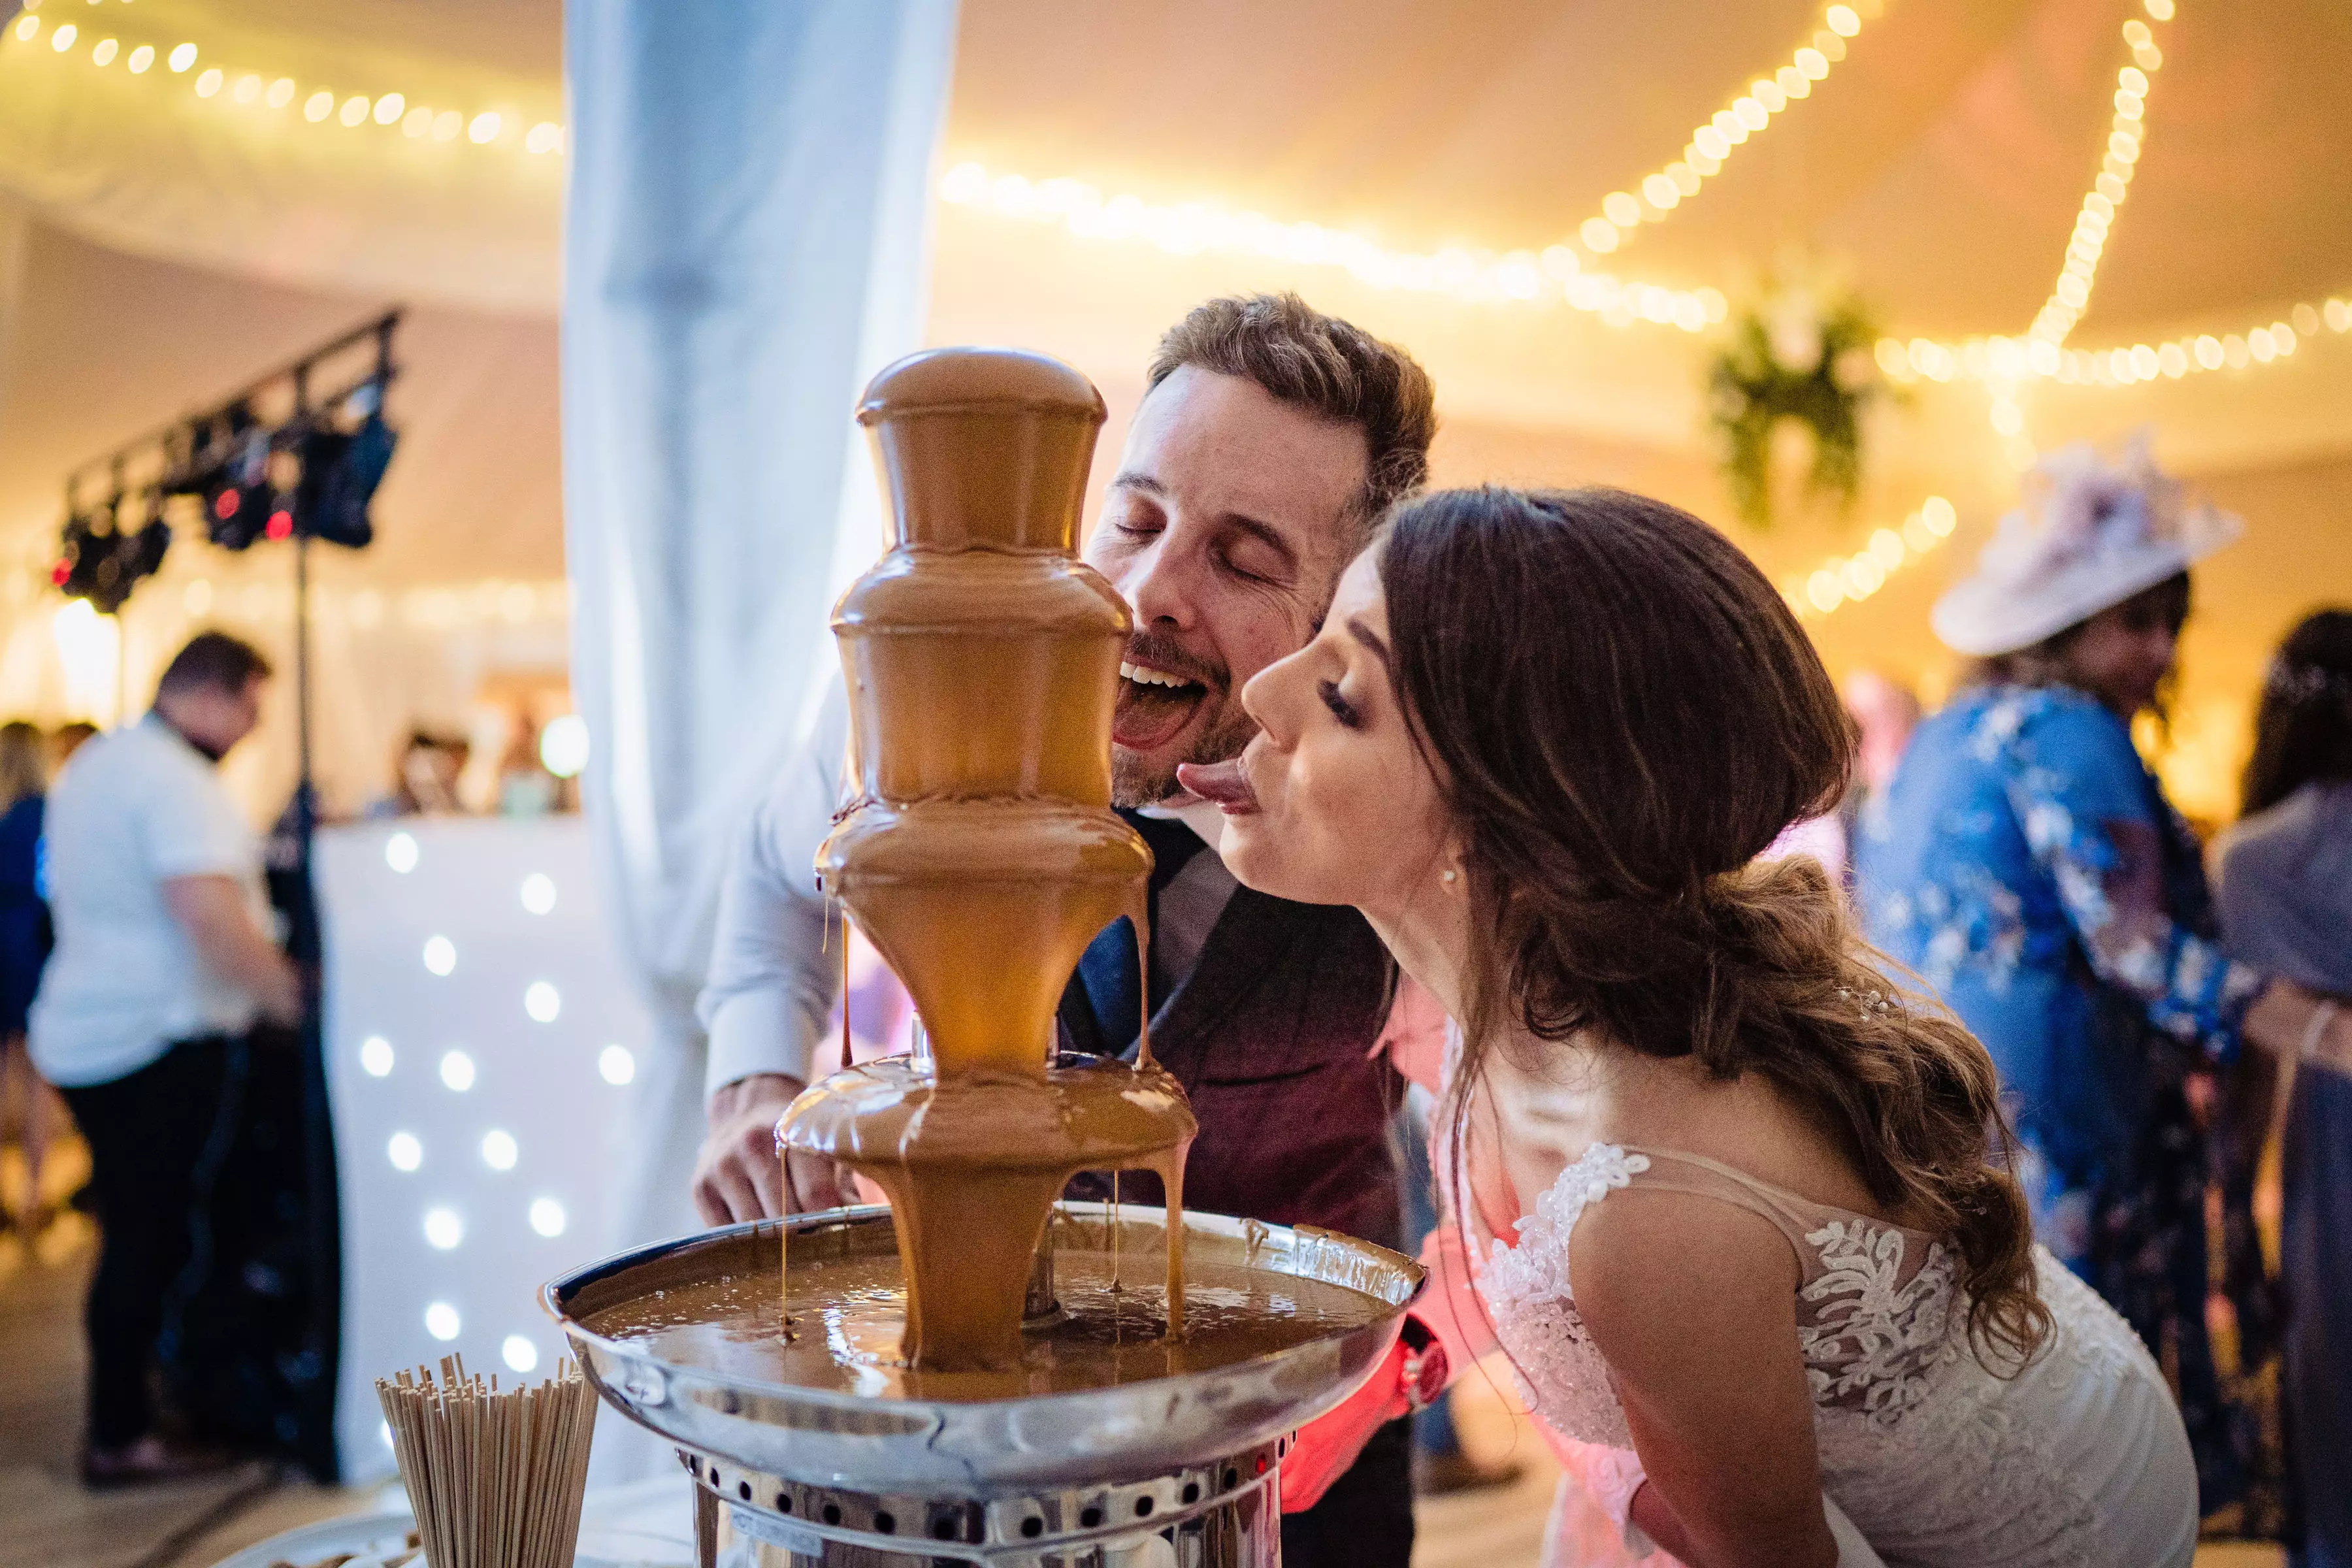 The wedding even featured a Biscoff fountain